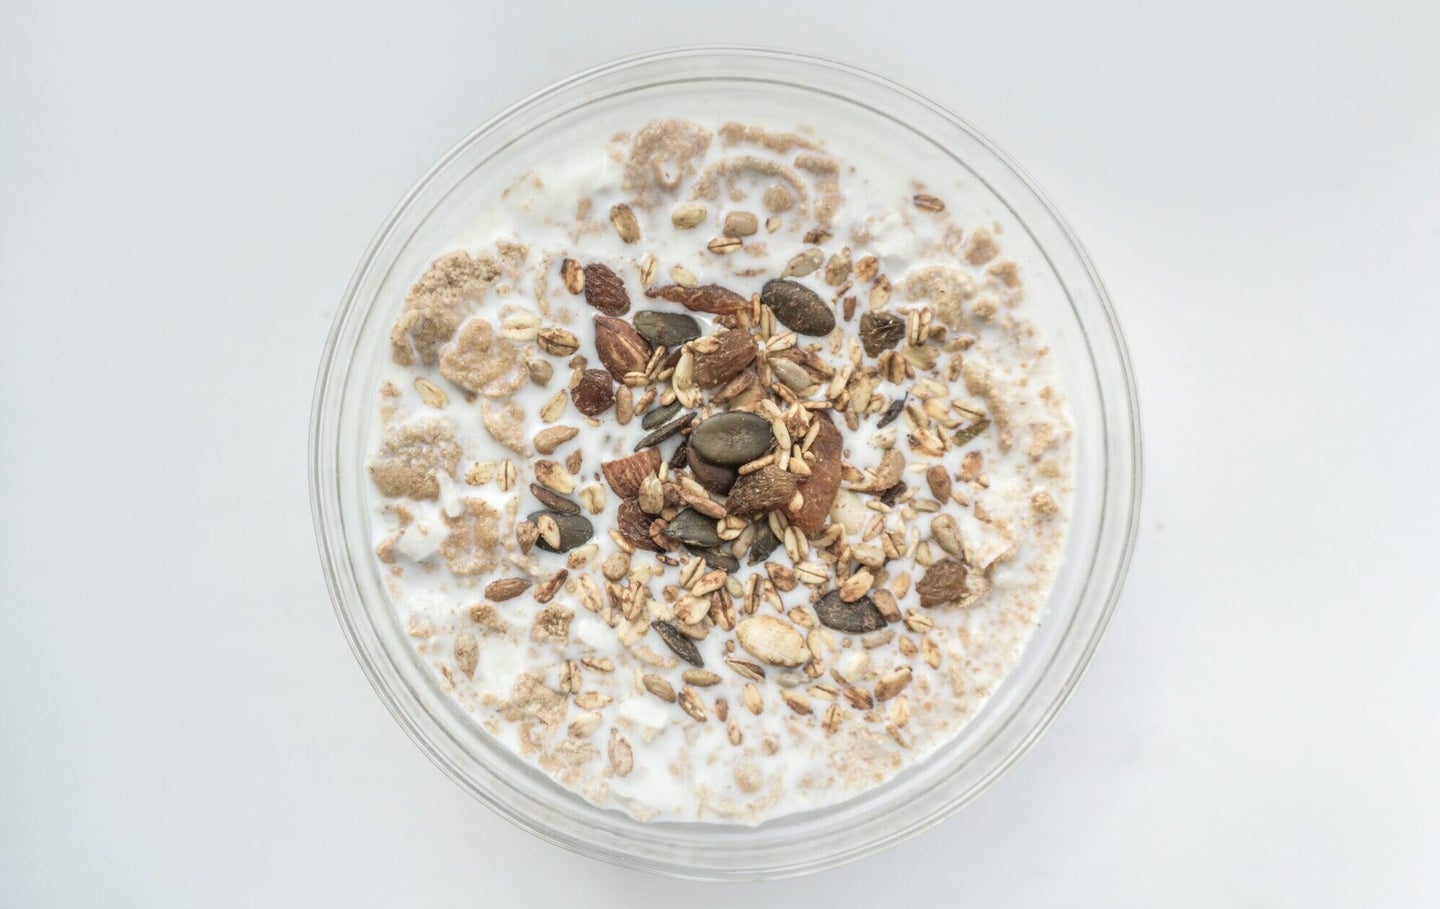 Bowl of oatmeal with milk on a white background. Are the oats gluten-free?